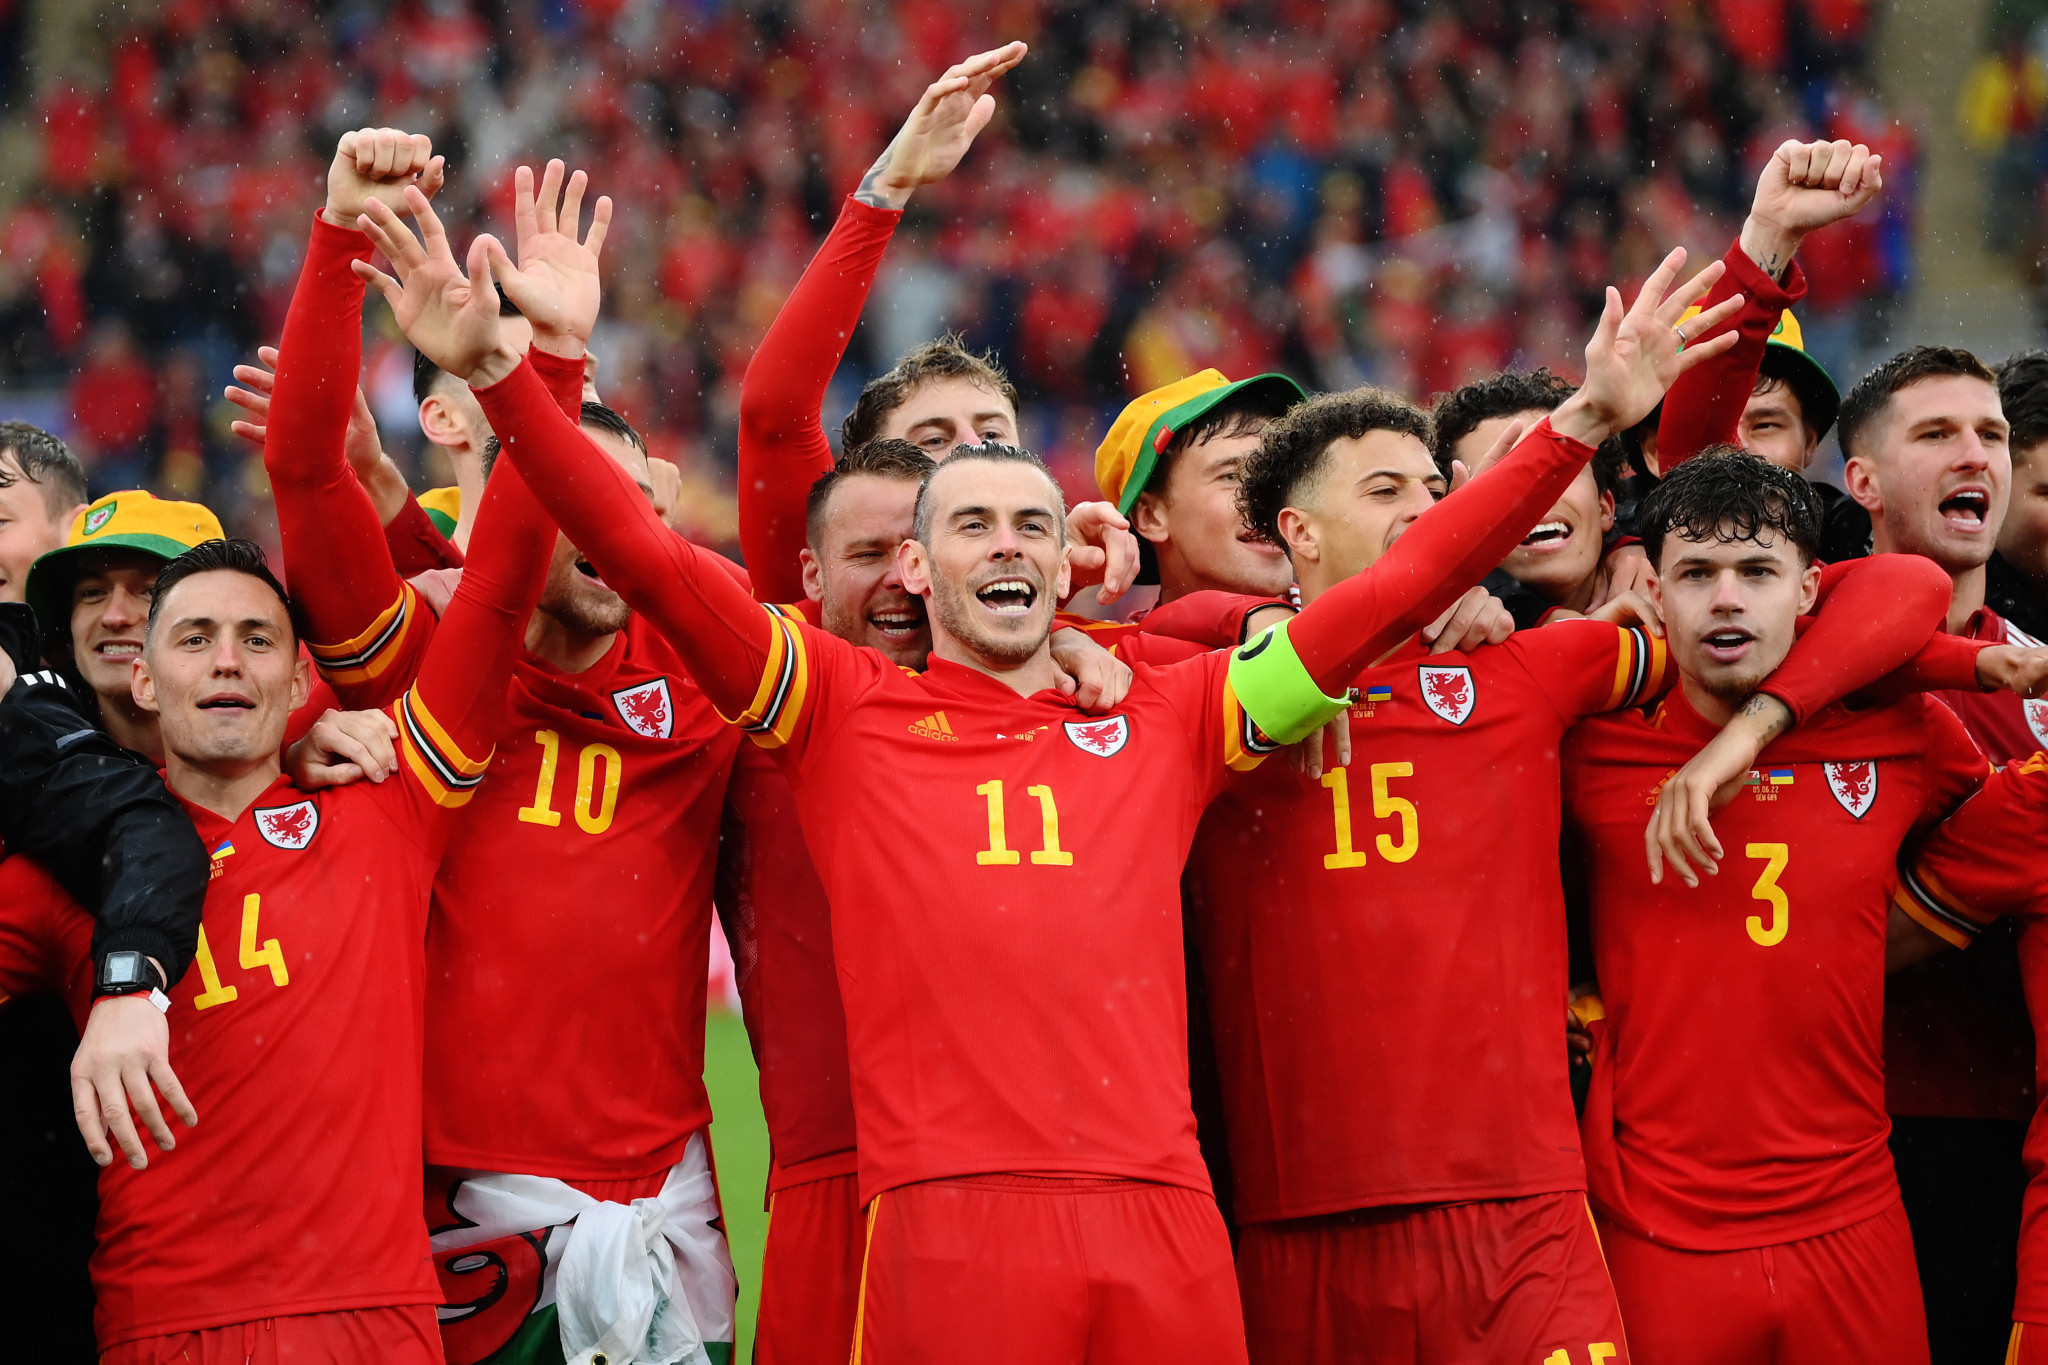 Ukraine bid to qualify for Qatar 2022 ends as Wales qualify for first FIFA World Cup since 1958